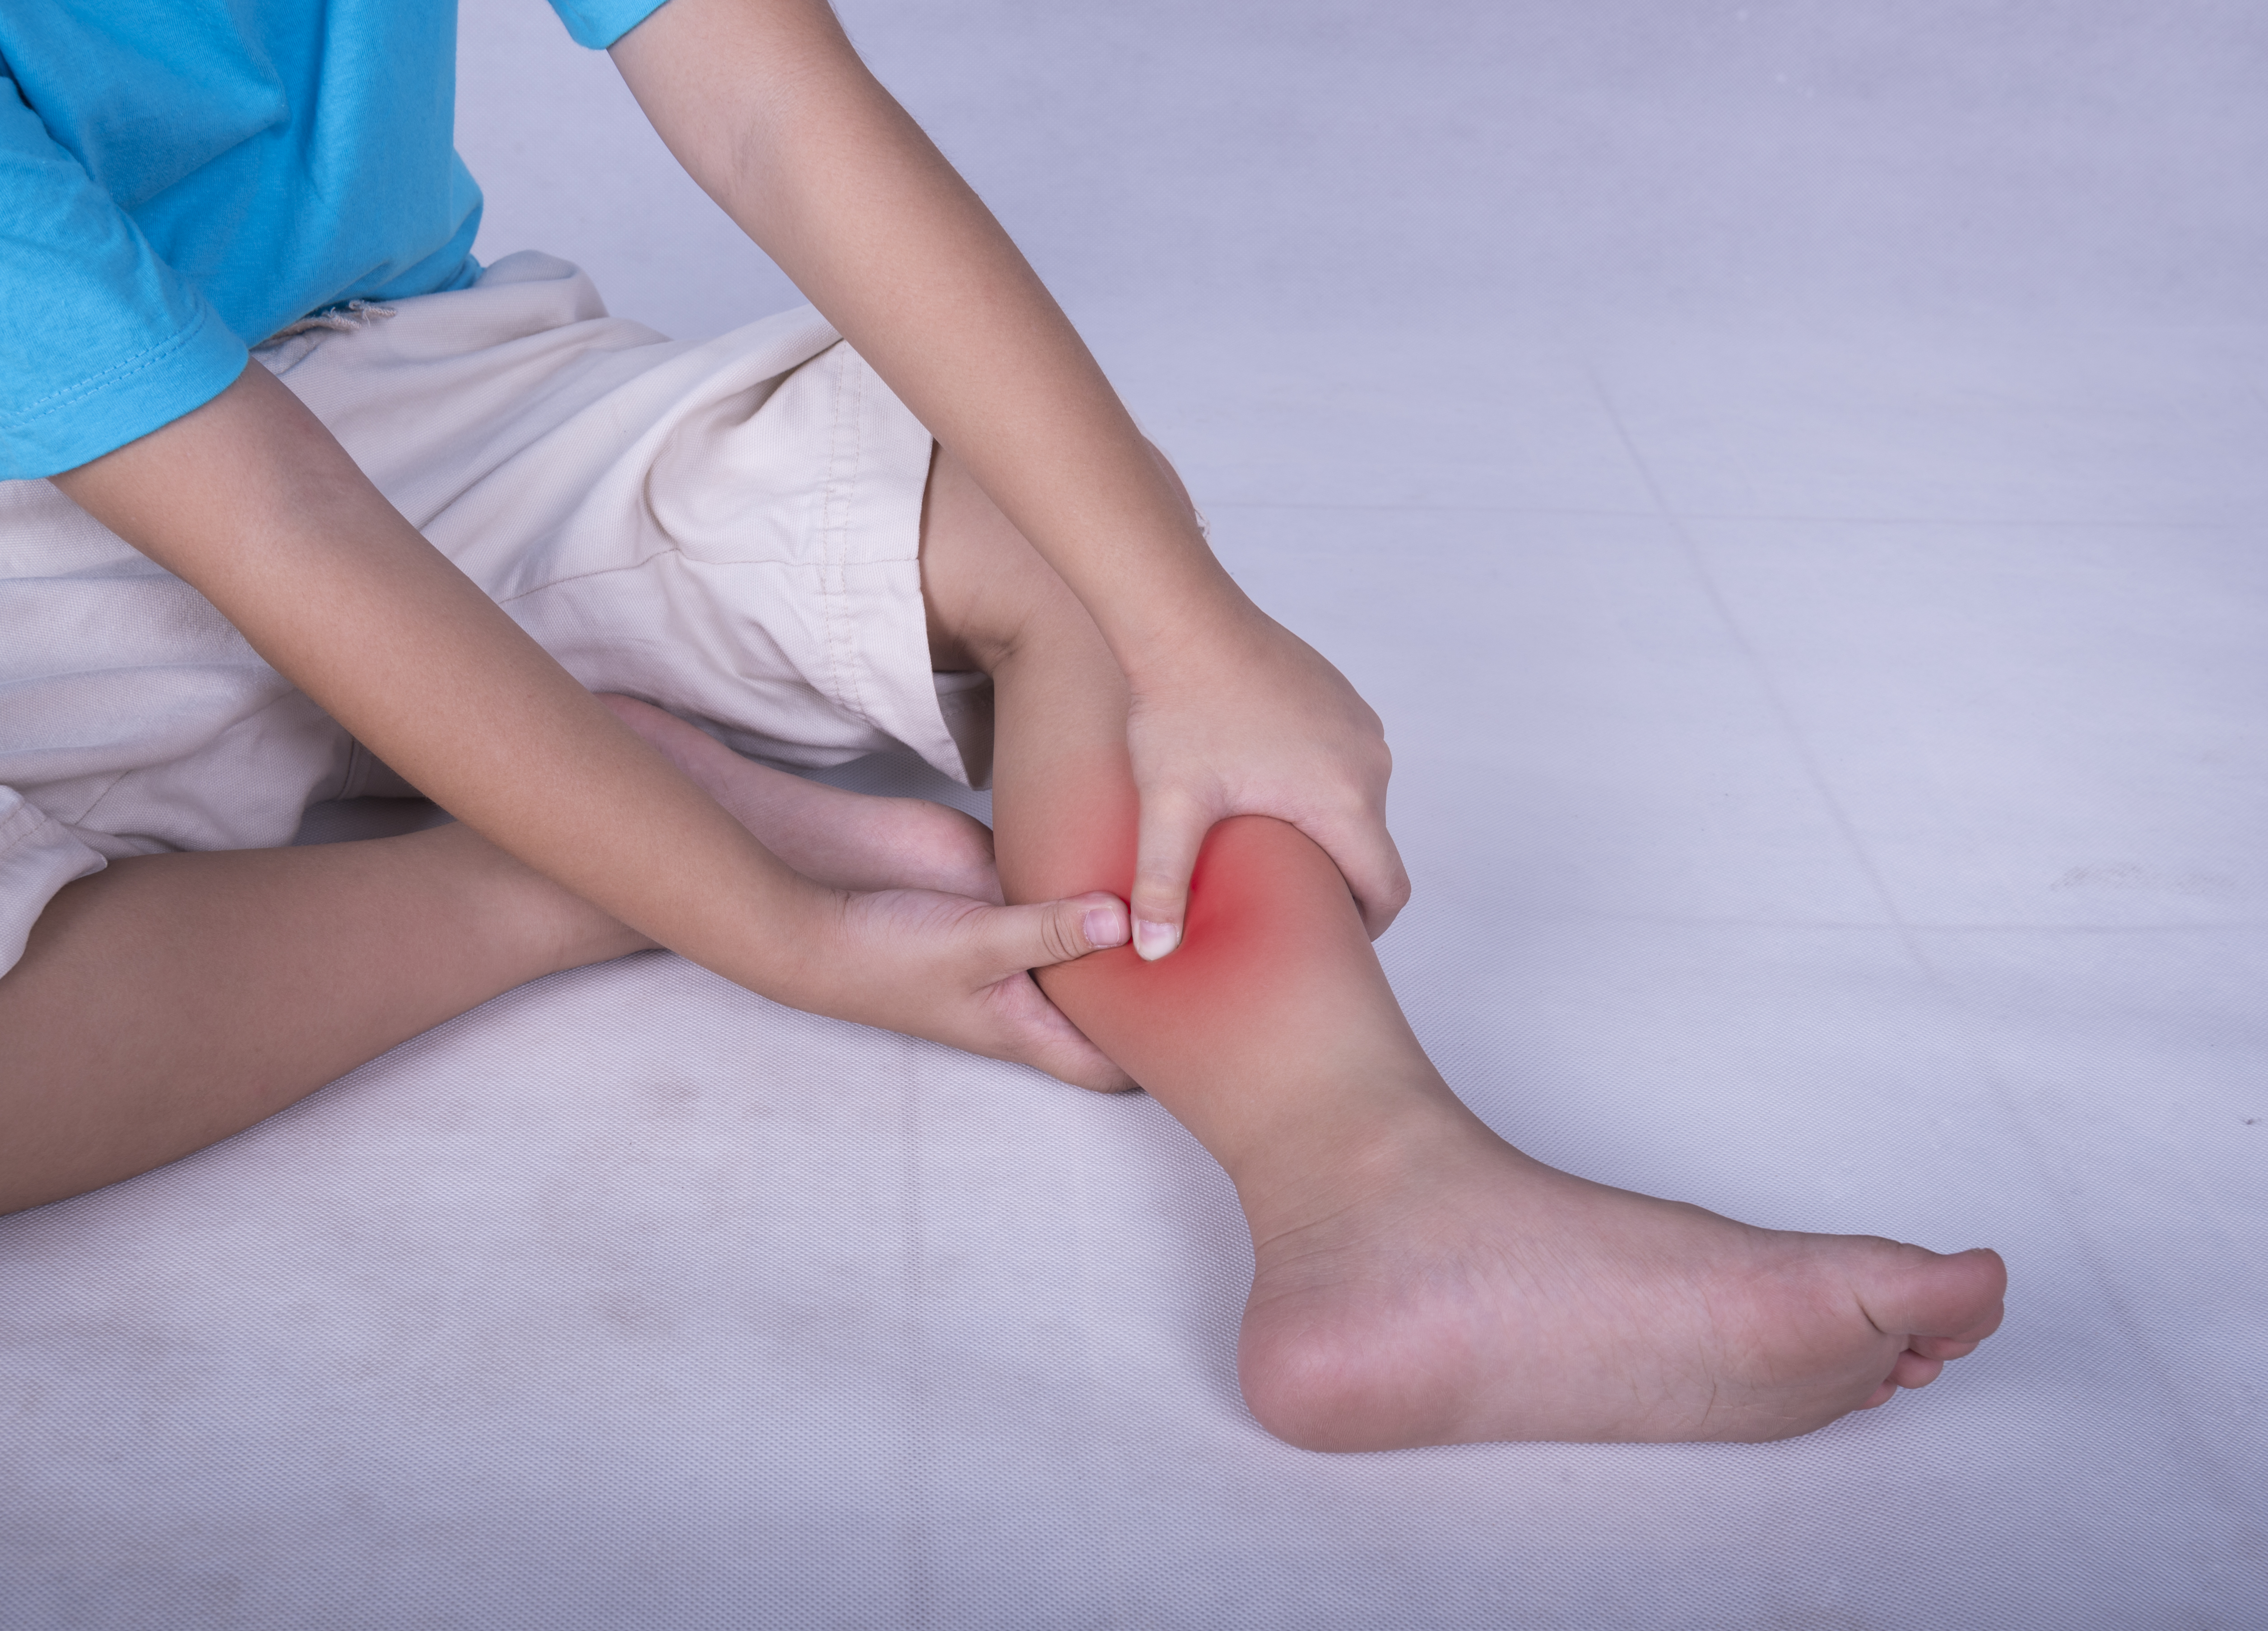 My child has leg pain, is it normal?